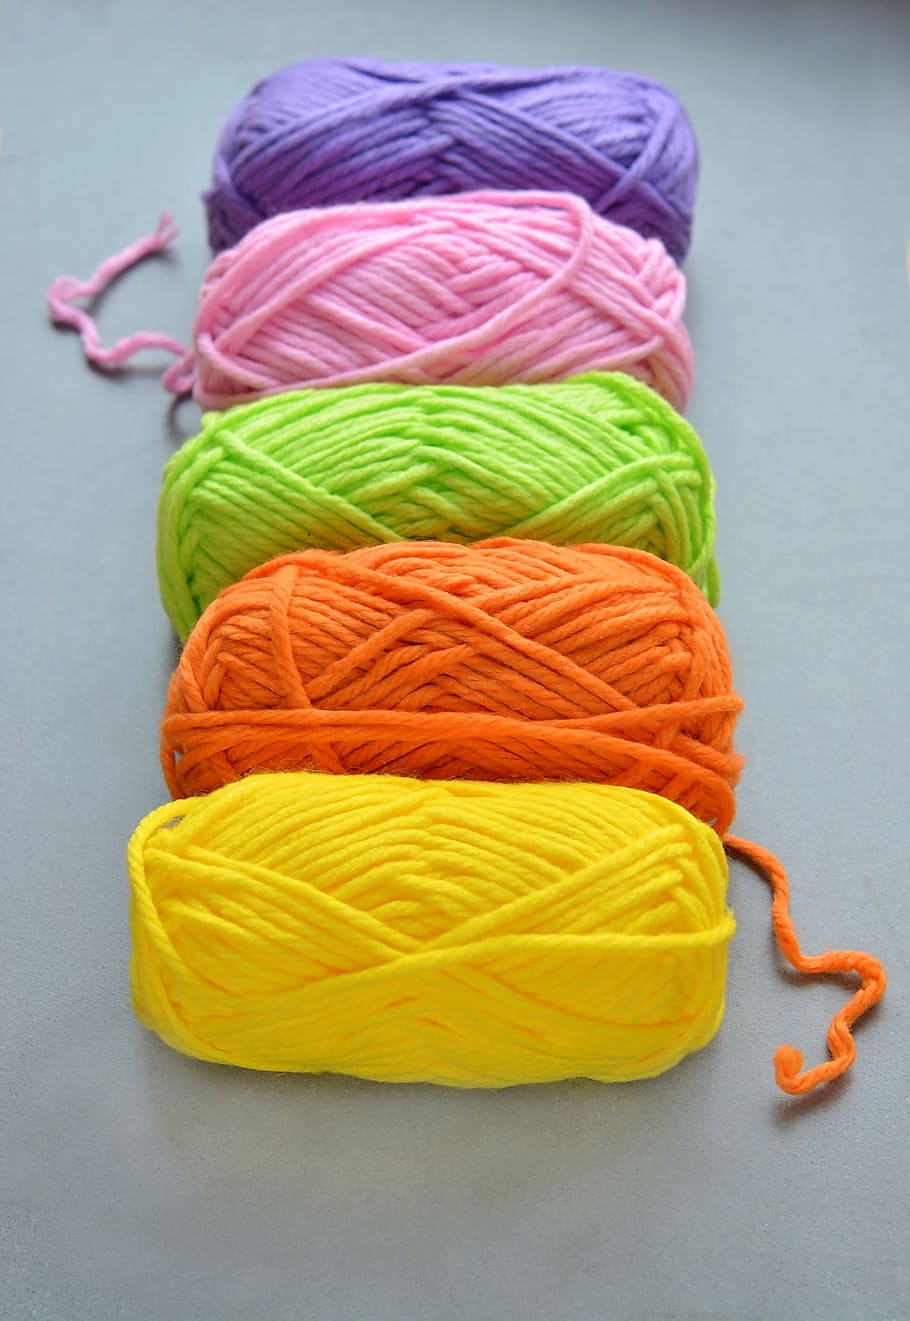 wool, color, colorful, cat's cradle, soft, knitting, knitwear, close, knitting wool, textile